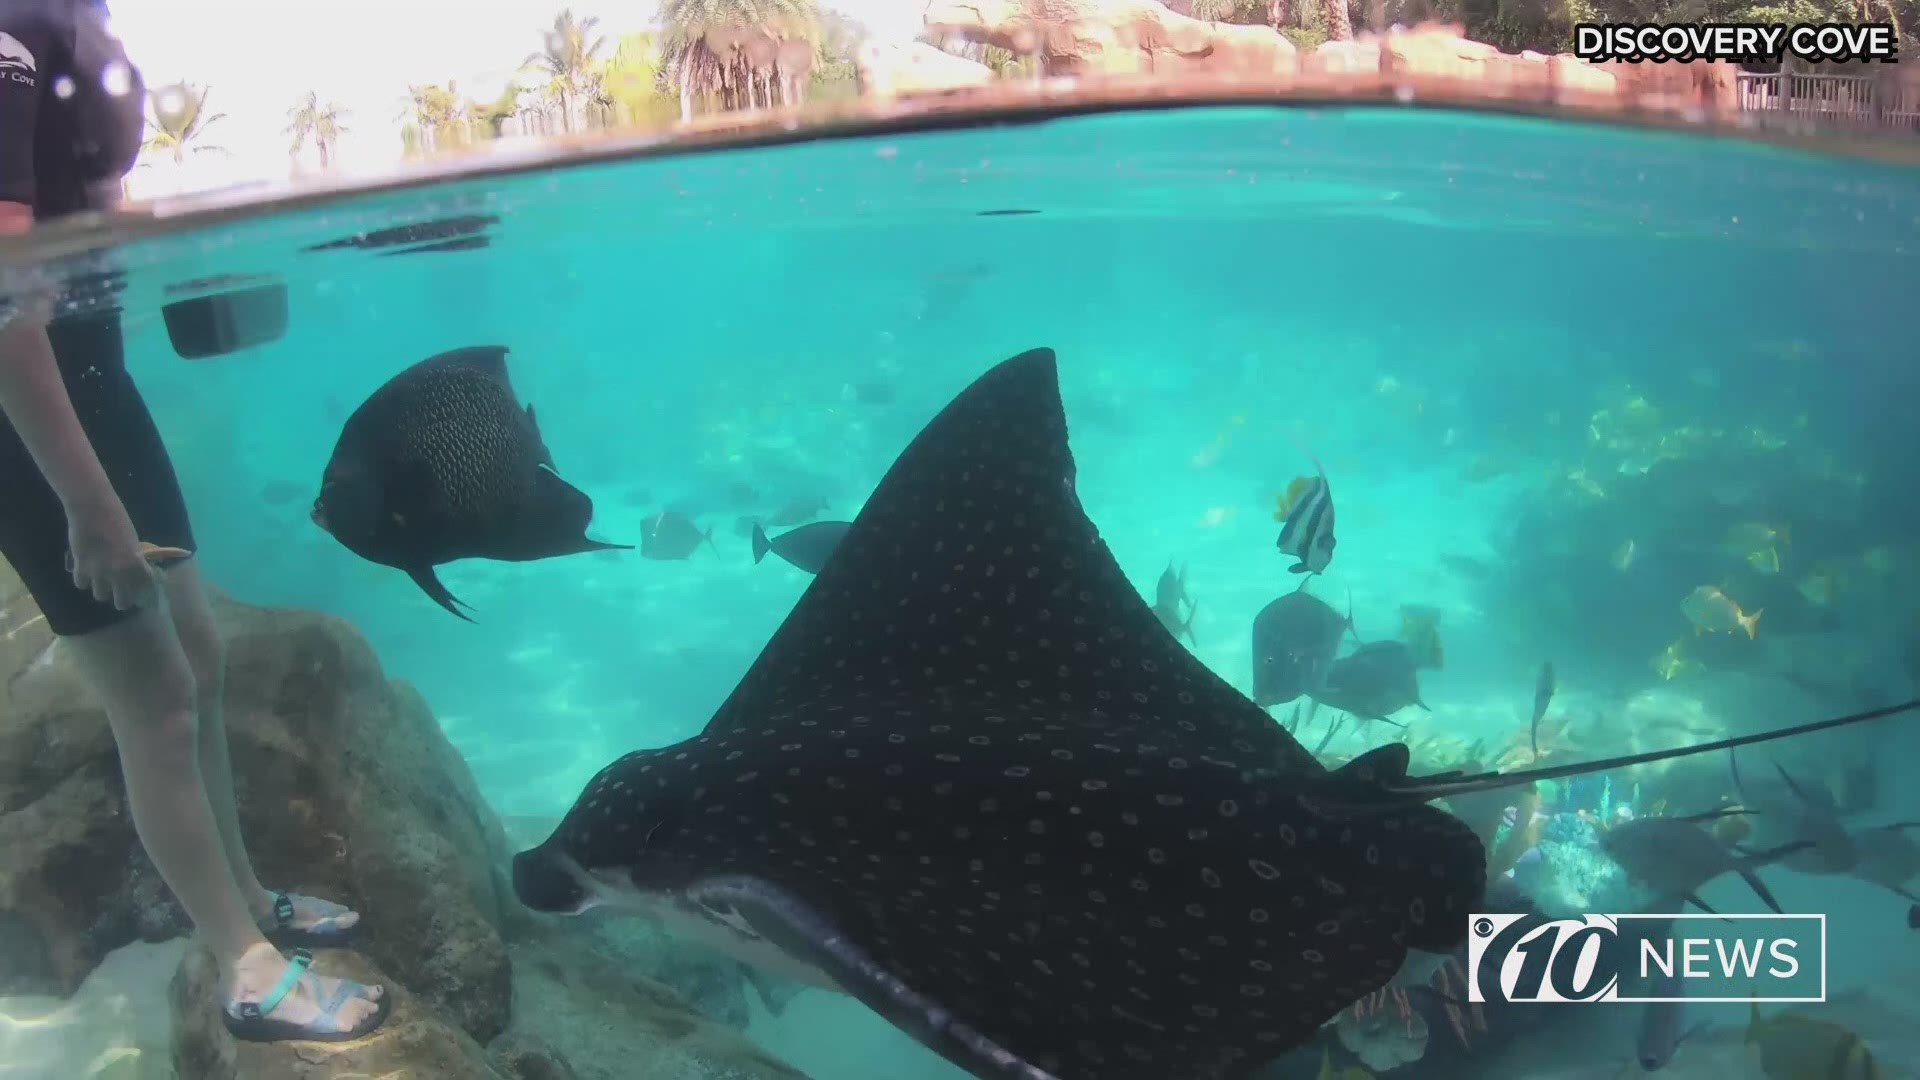 Just in time for Mother's Day, two spotted eagle rays were born at Discovery Cove. They are the first babies of proud parents Nerina and Apollo.